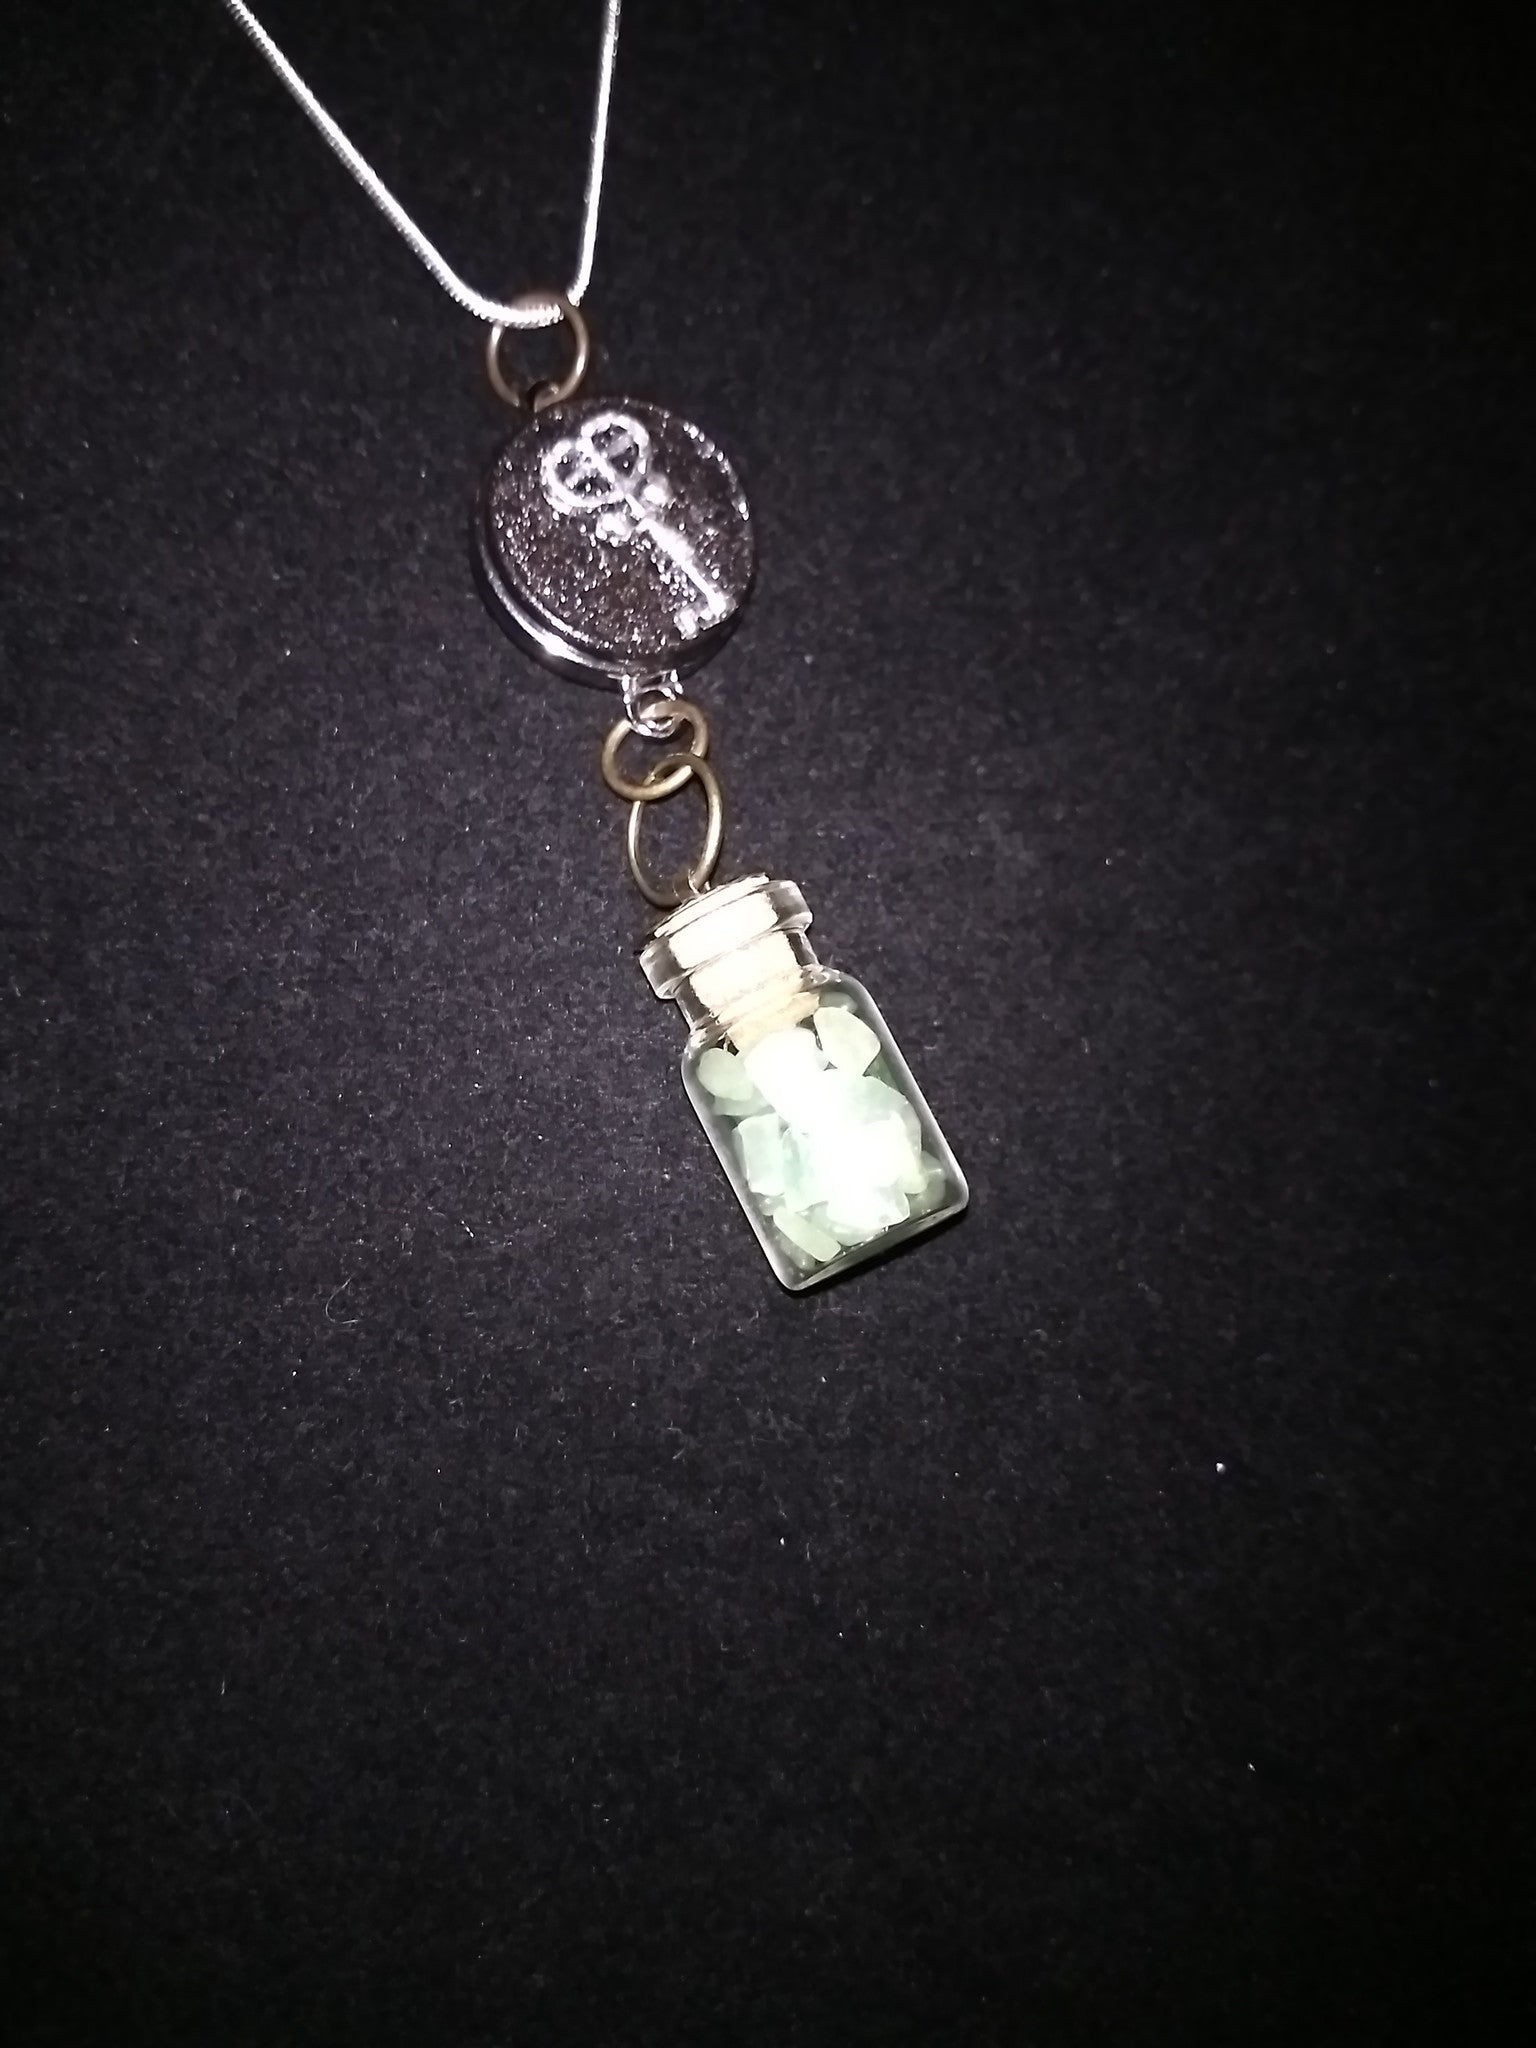 Crystals in a bottle gem necklace with removable snap